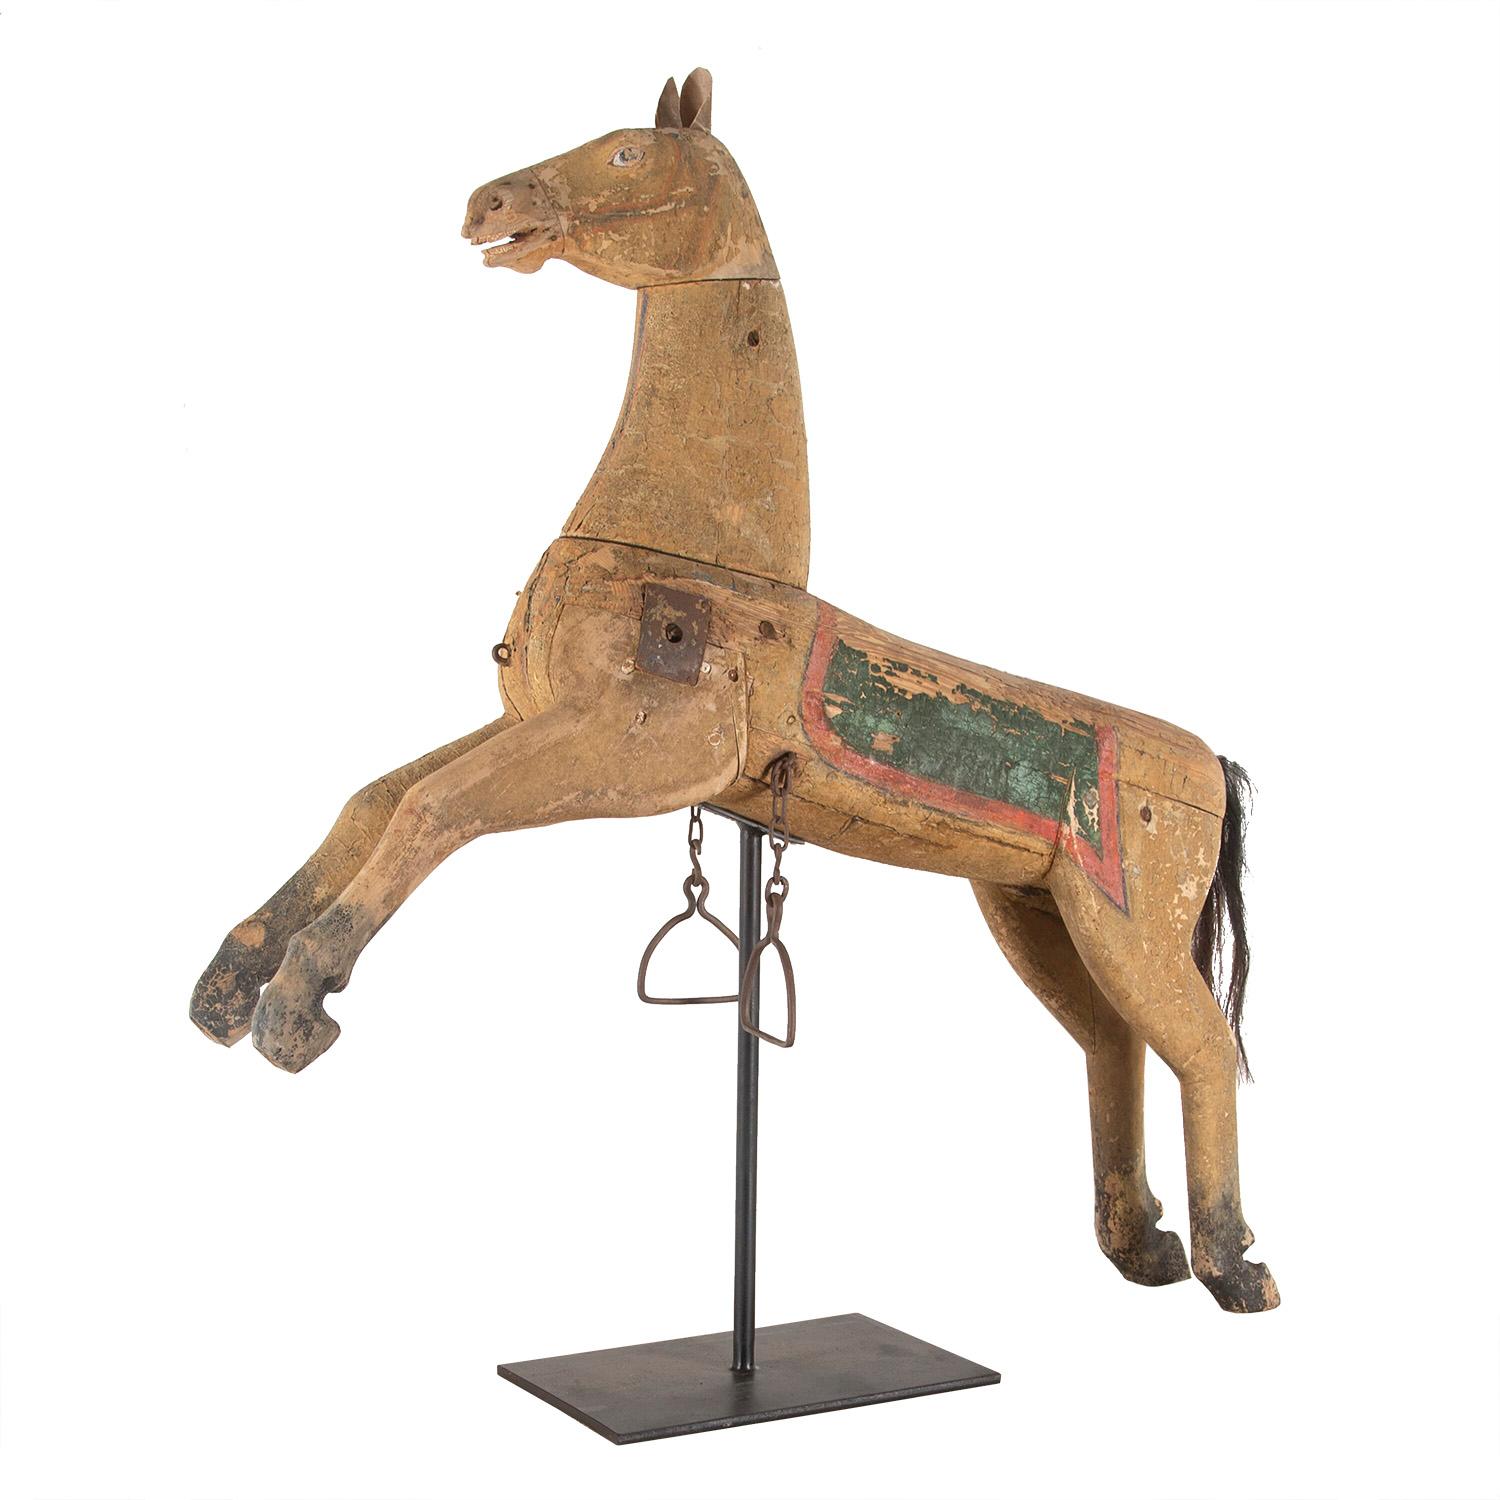 19th century carved wooden horse in original paint.